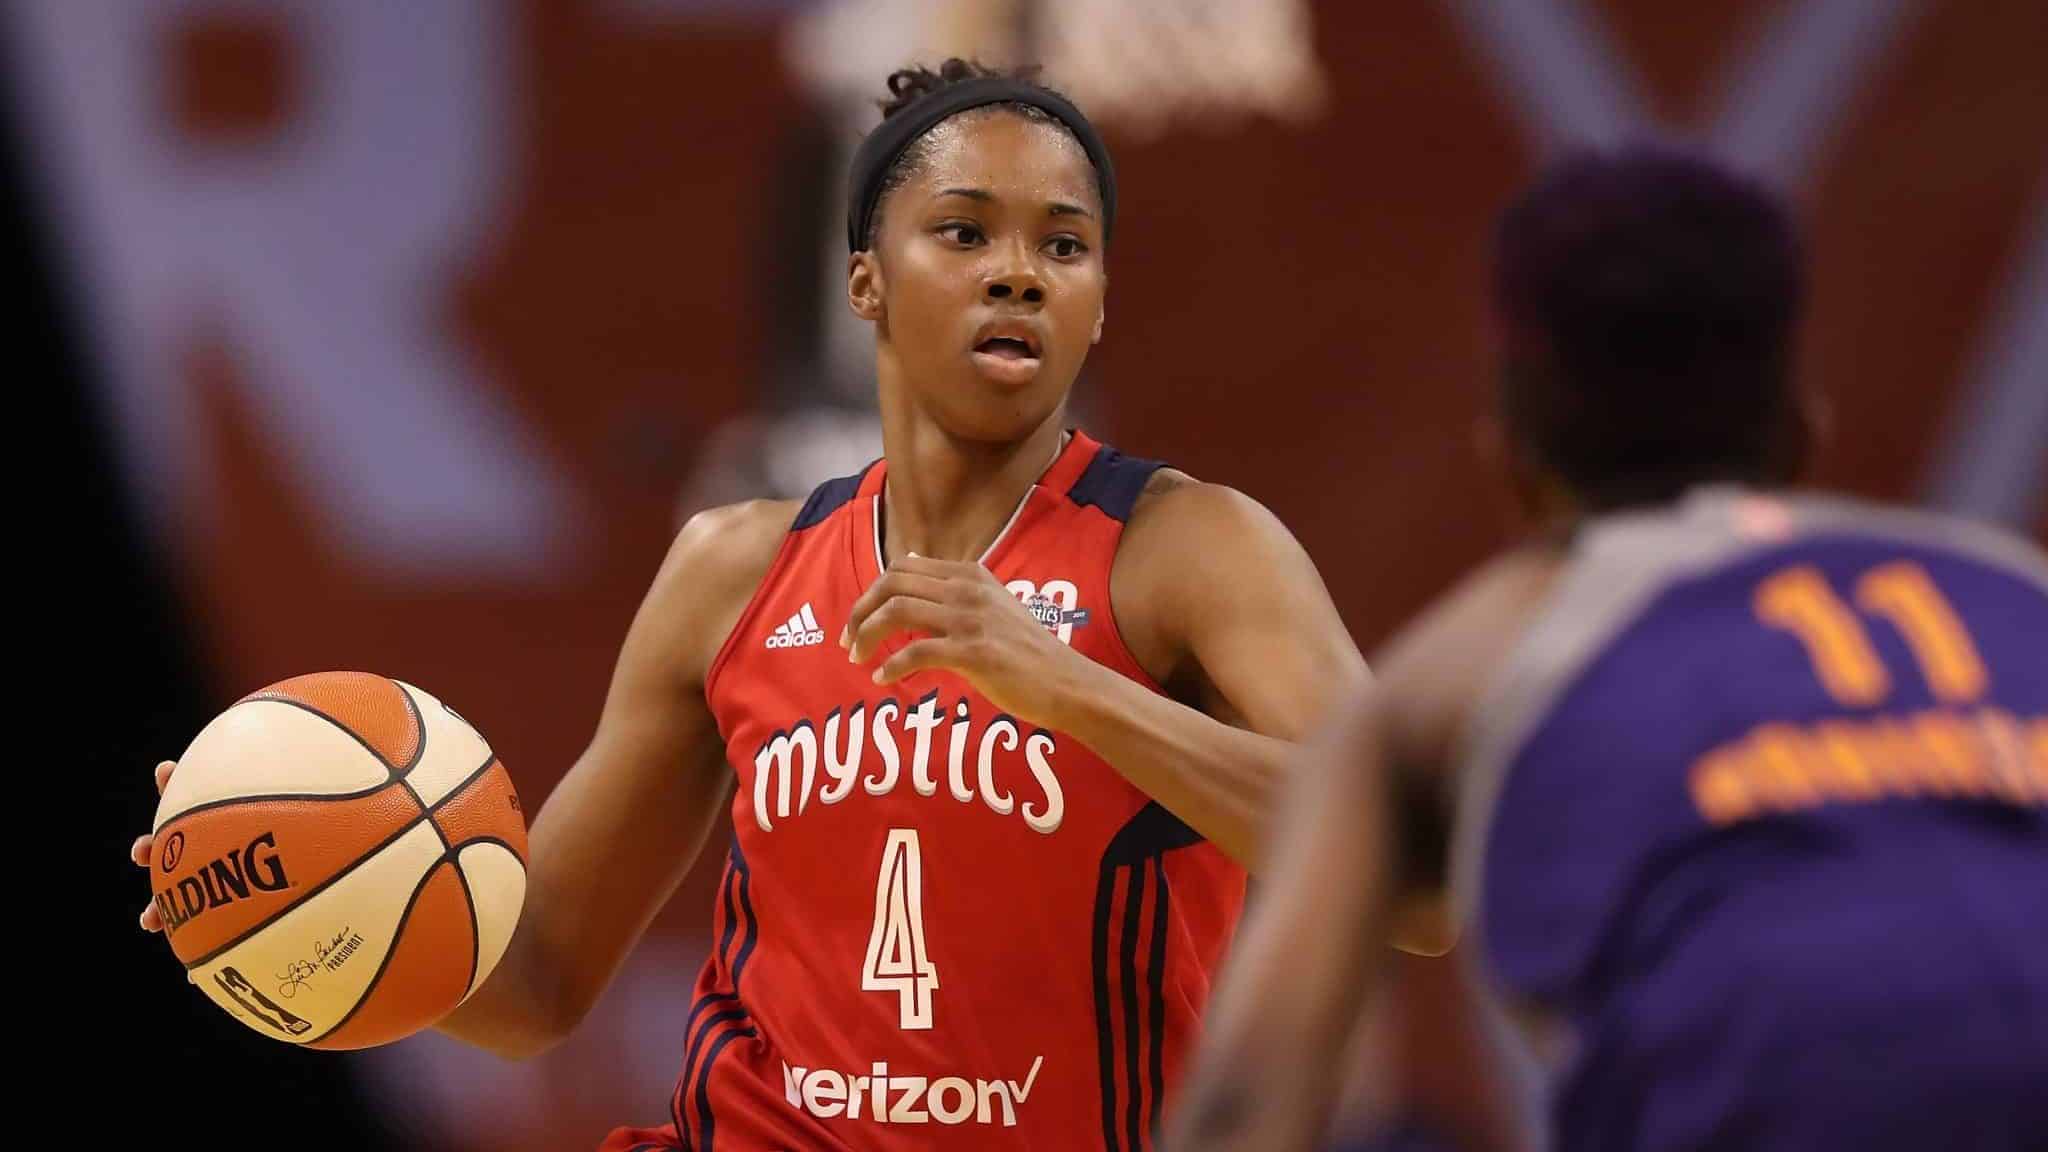 PHOENIX, AZ - JULY 05: Tayler Hill #4 of the Washington Mystics handles the ball during the WNBA game against the Phoenix Mercury at Talking Stick Resort Arena on July 5, 2017 in Phoenix, Arizona. NOTE TO USER: User expressly acknowledges and agrees that, by downloading and or using this photograph, User is consenting to the terms and conditions of the Getty Images License Agreement.